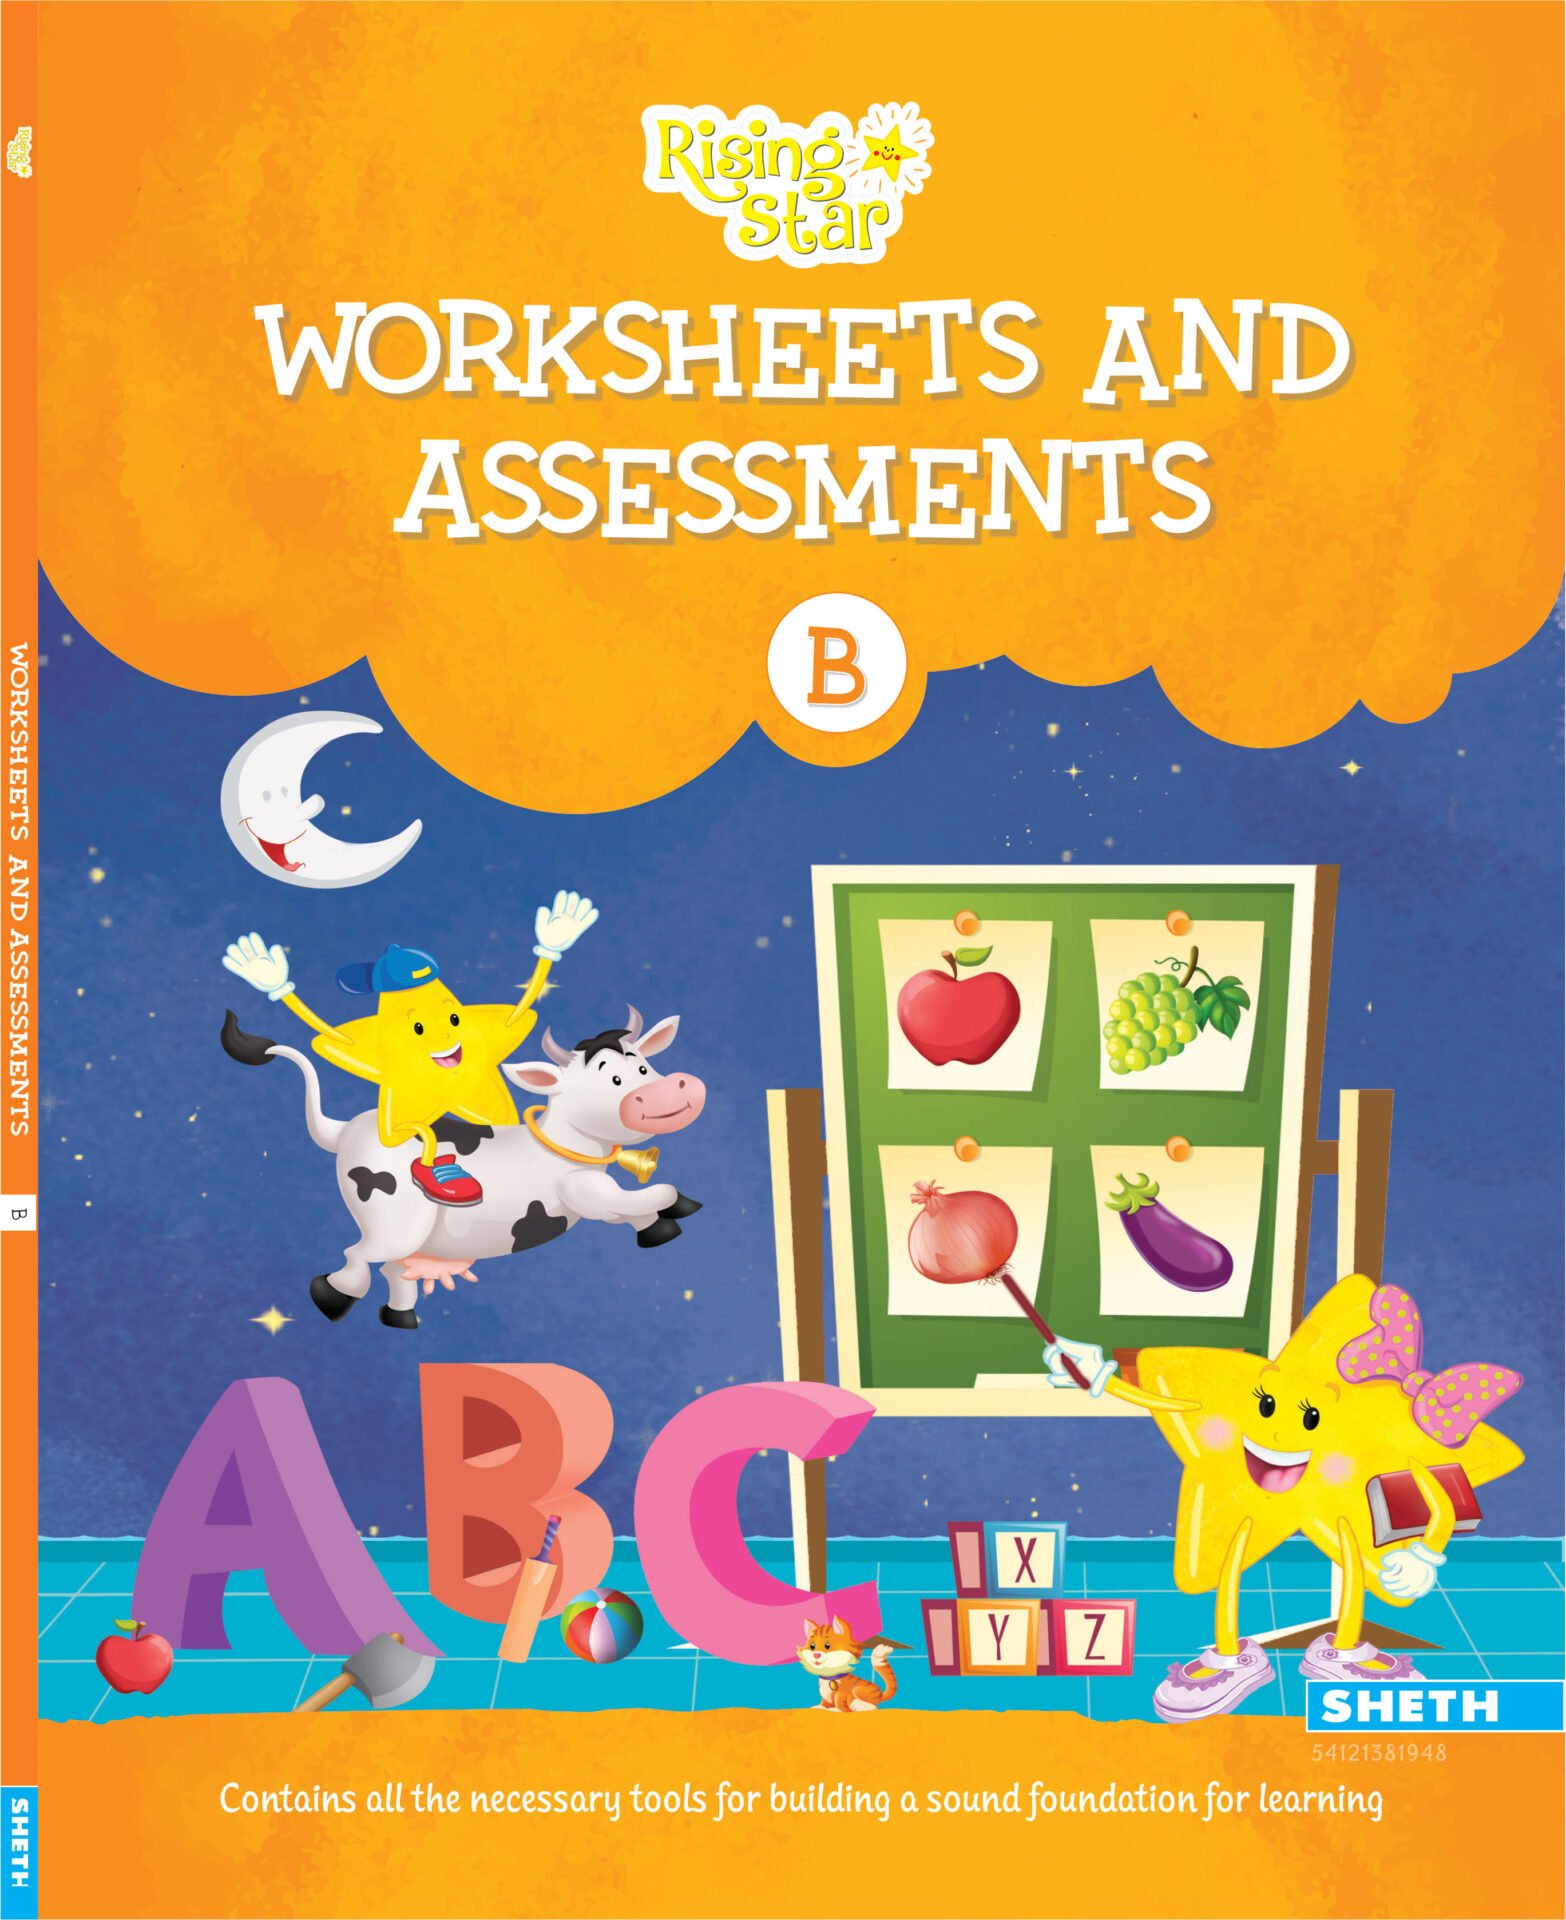 Rising Star Worksheets and Assessments B 0 1